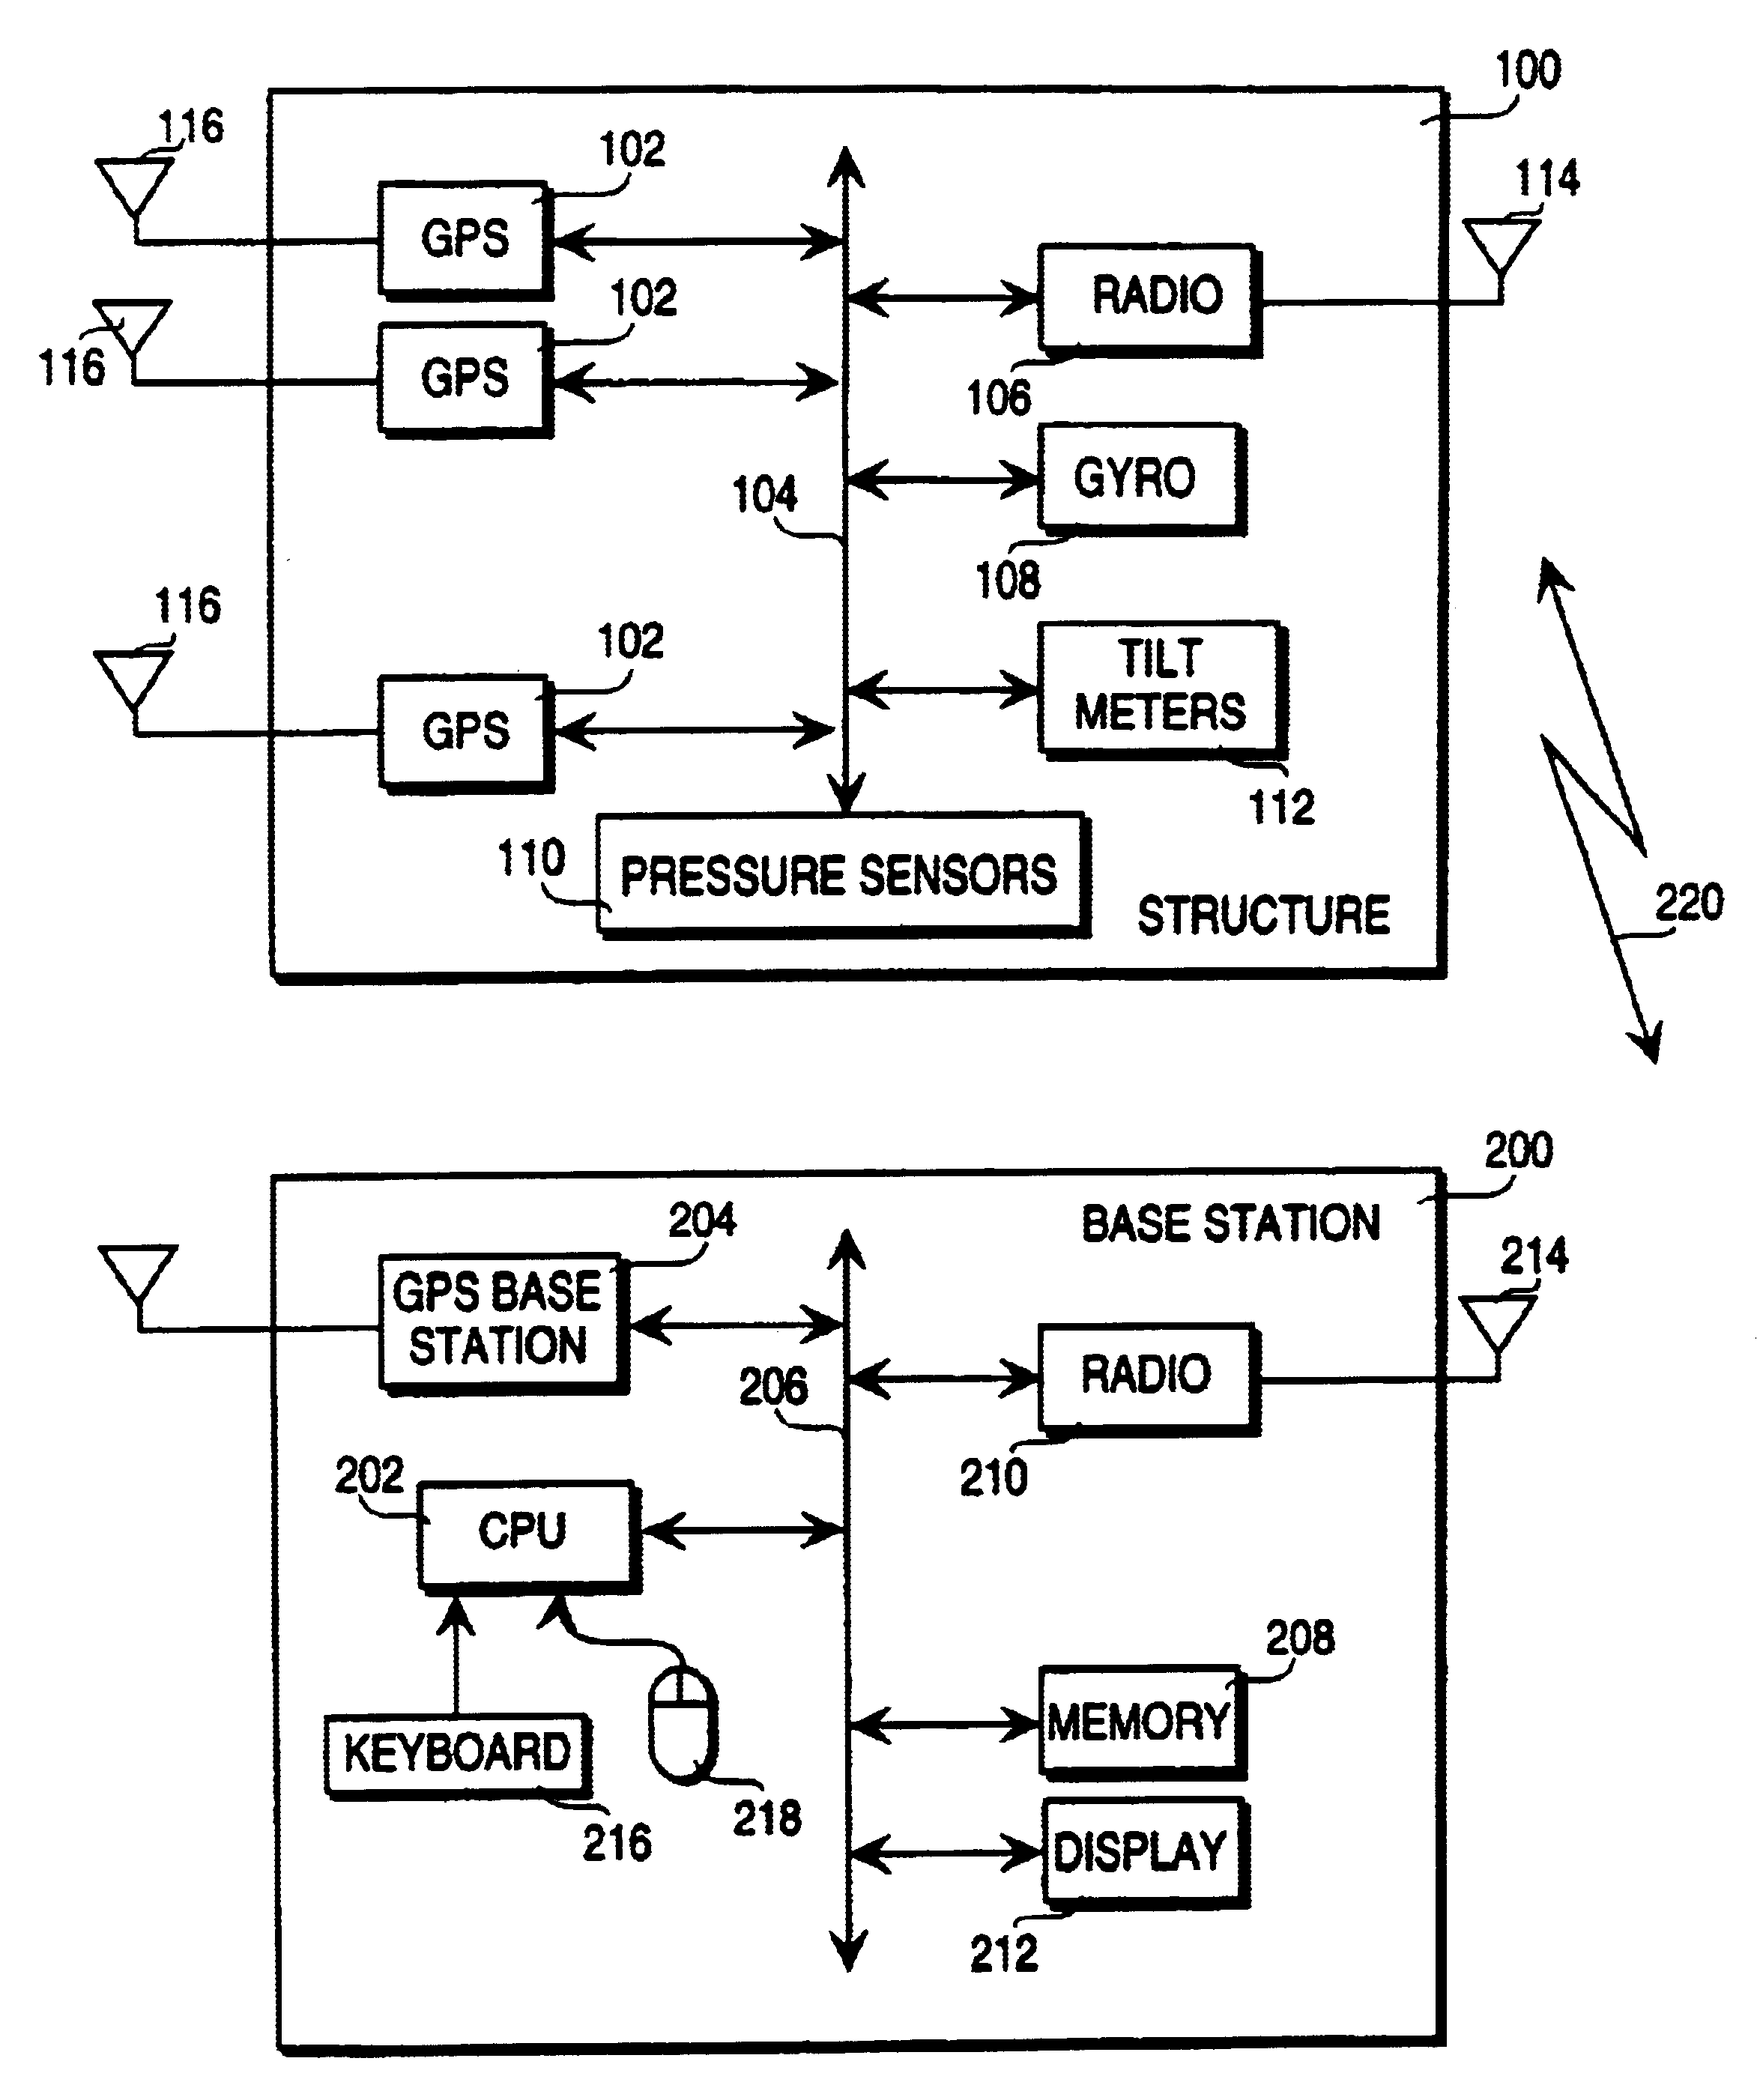 Method and apparatus for precise positioning of large structures